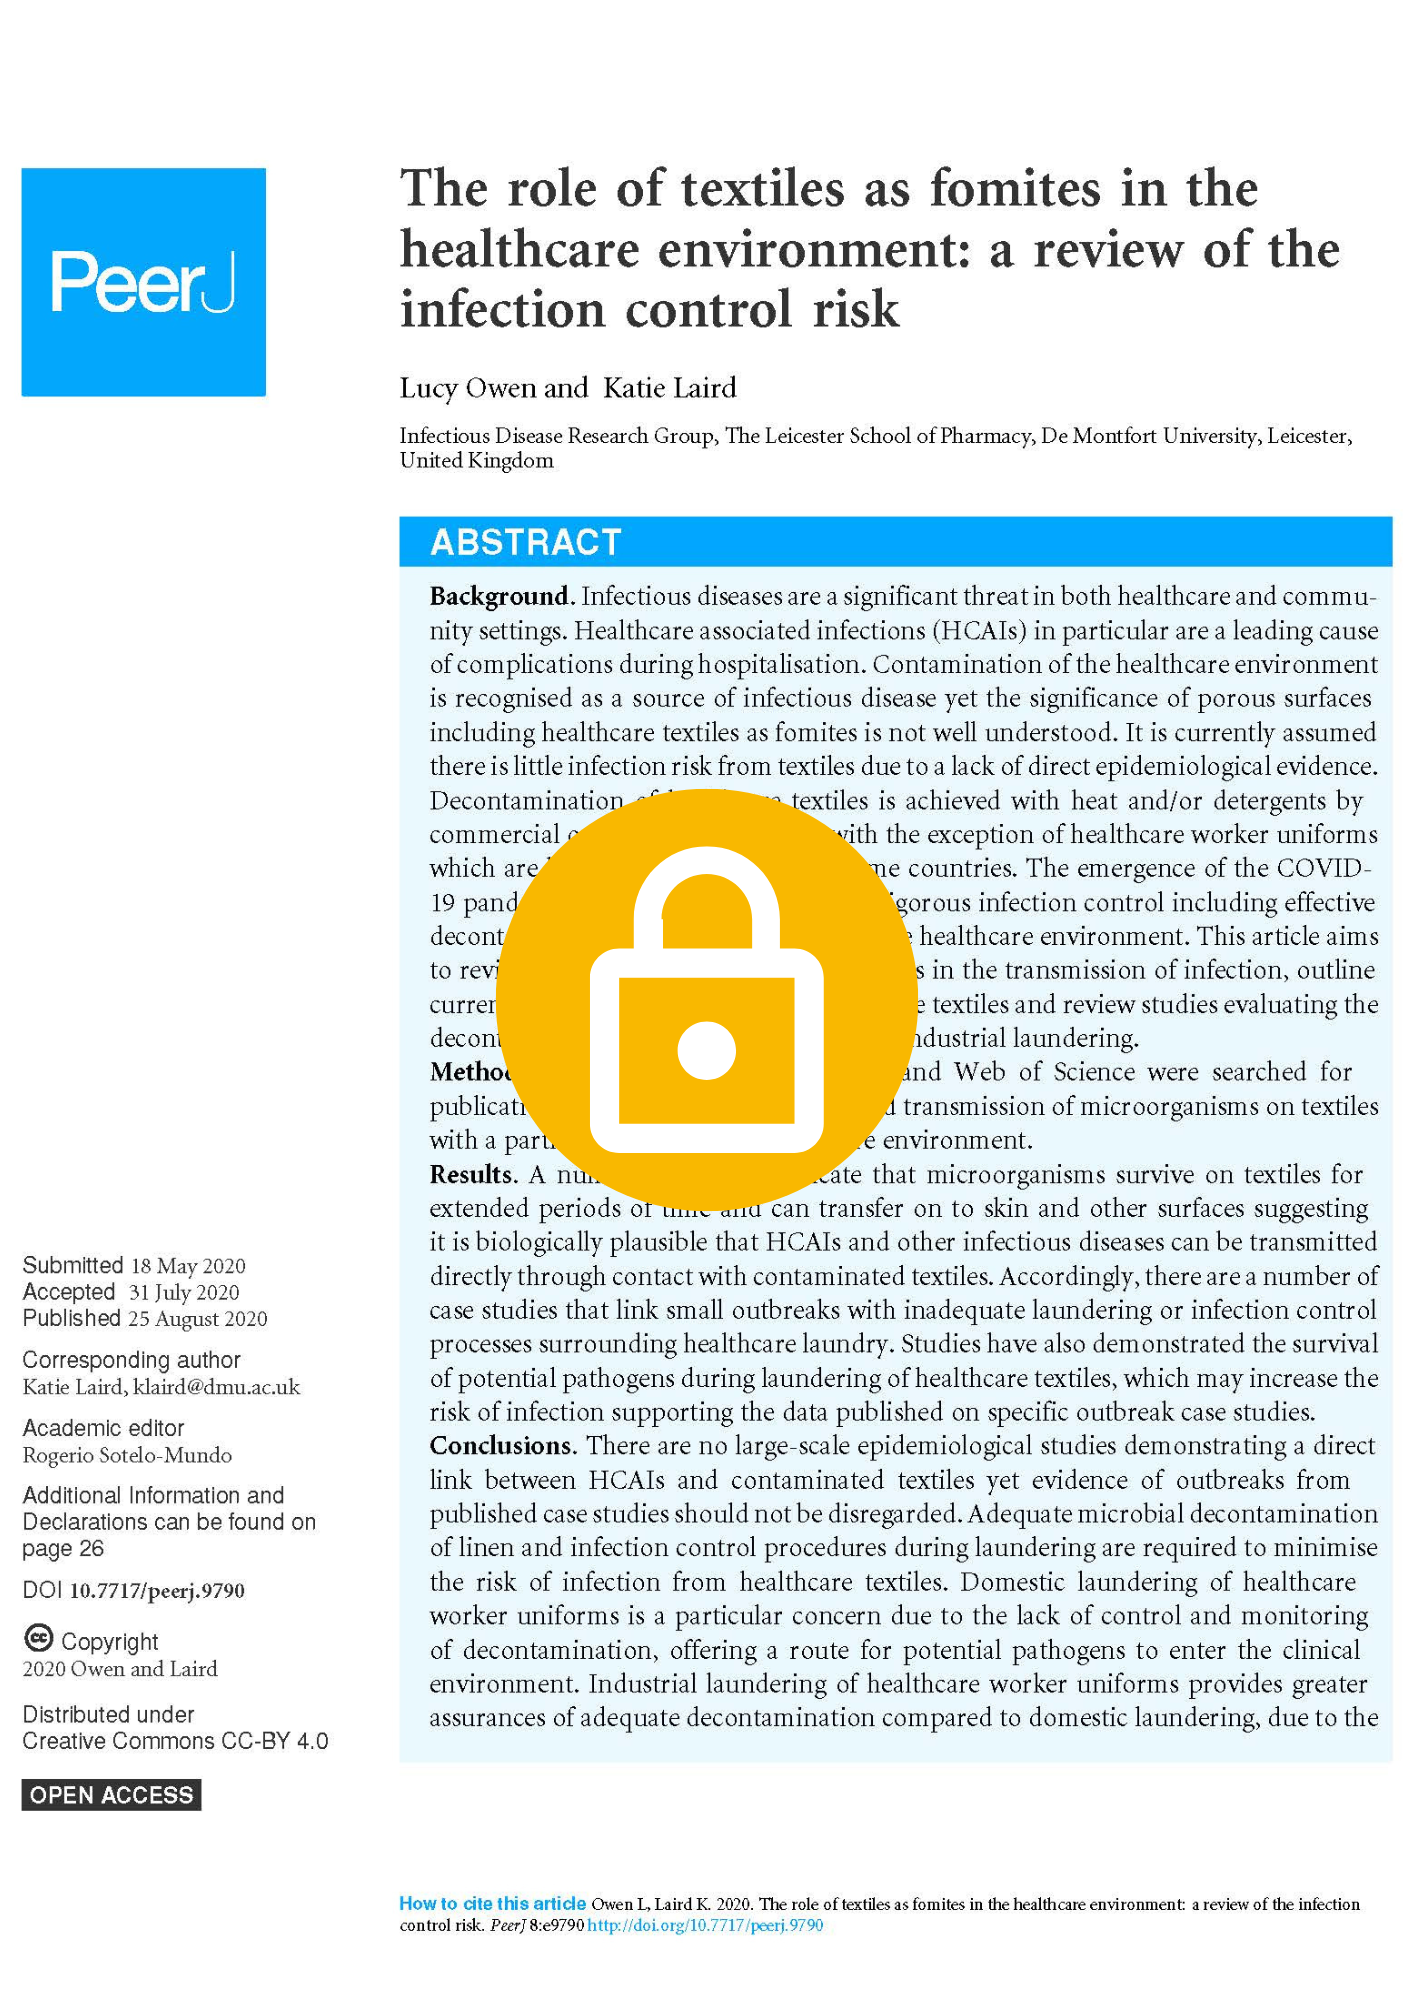 The role of textiles as fomites in the healthcare environment: a review of the infection control risk